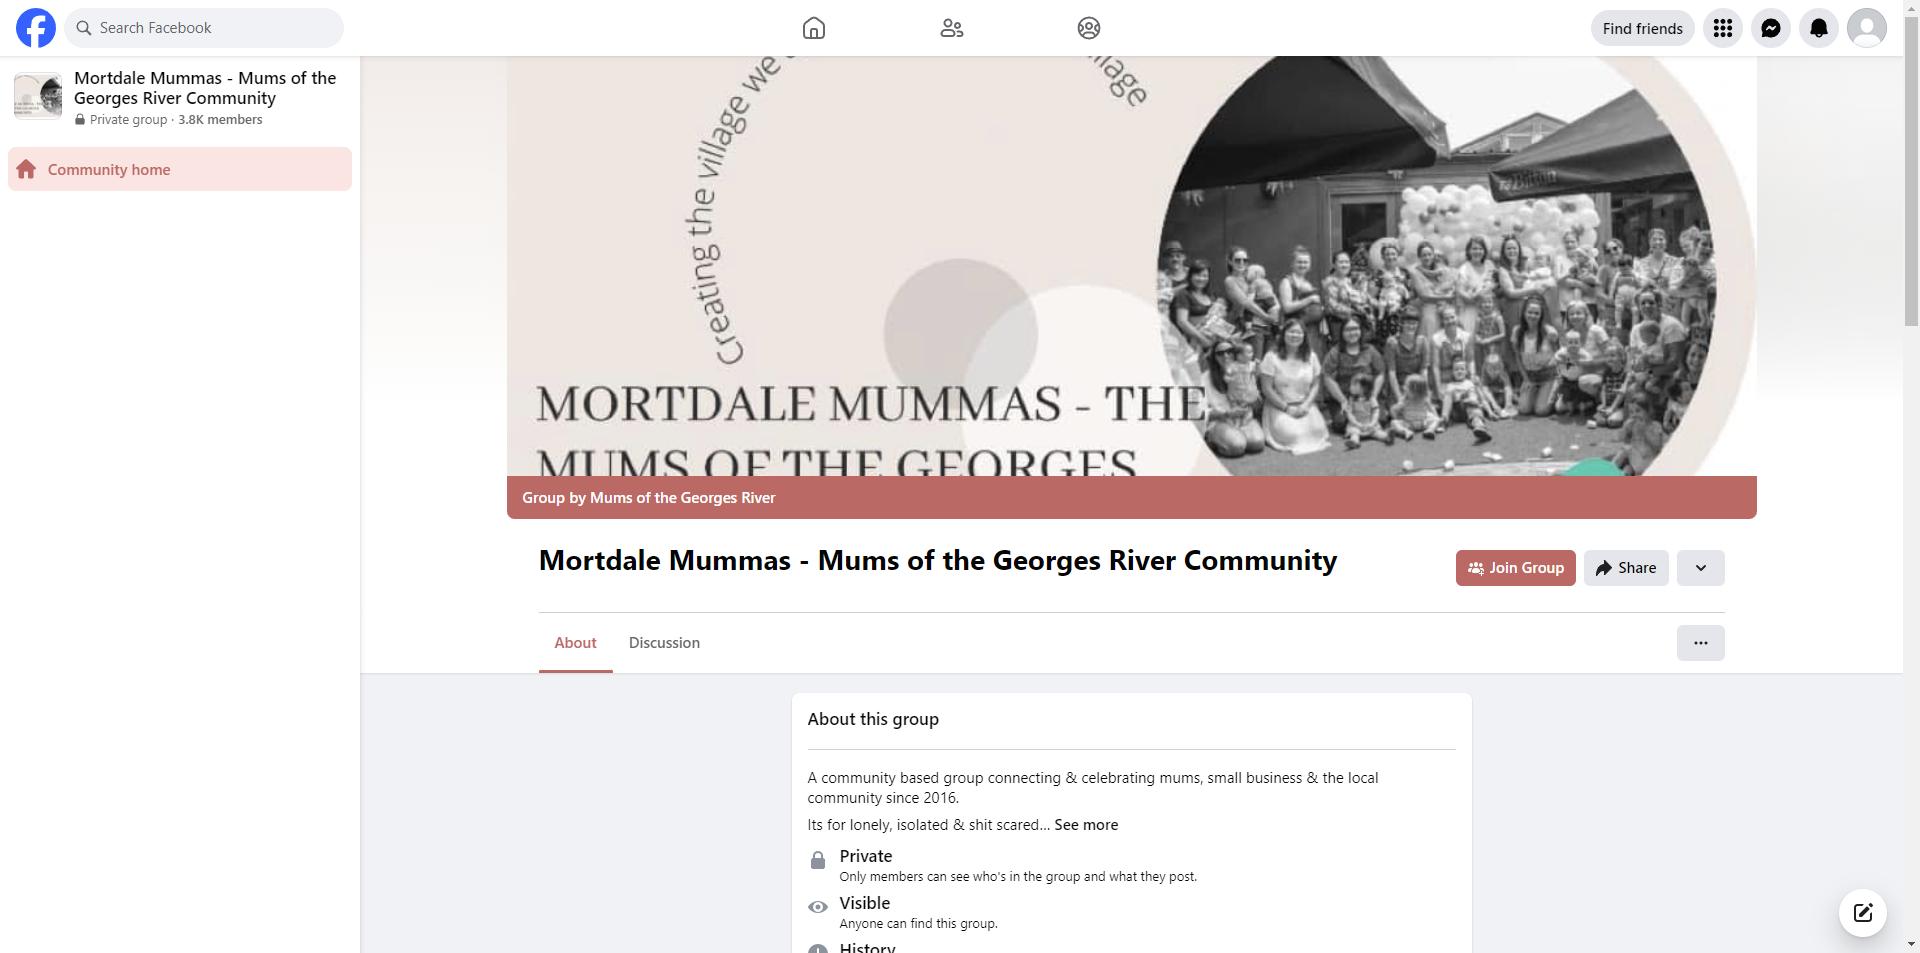 Mortdale Mummas - Mums of the Georges River Community